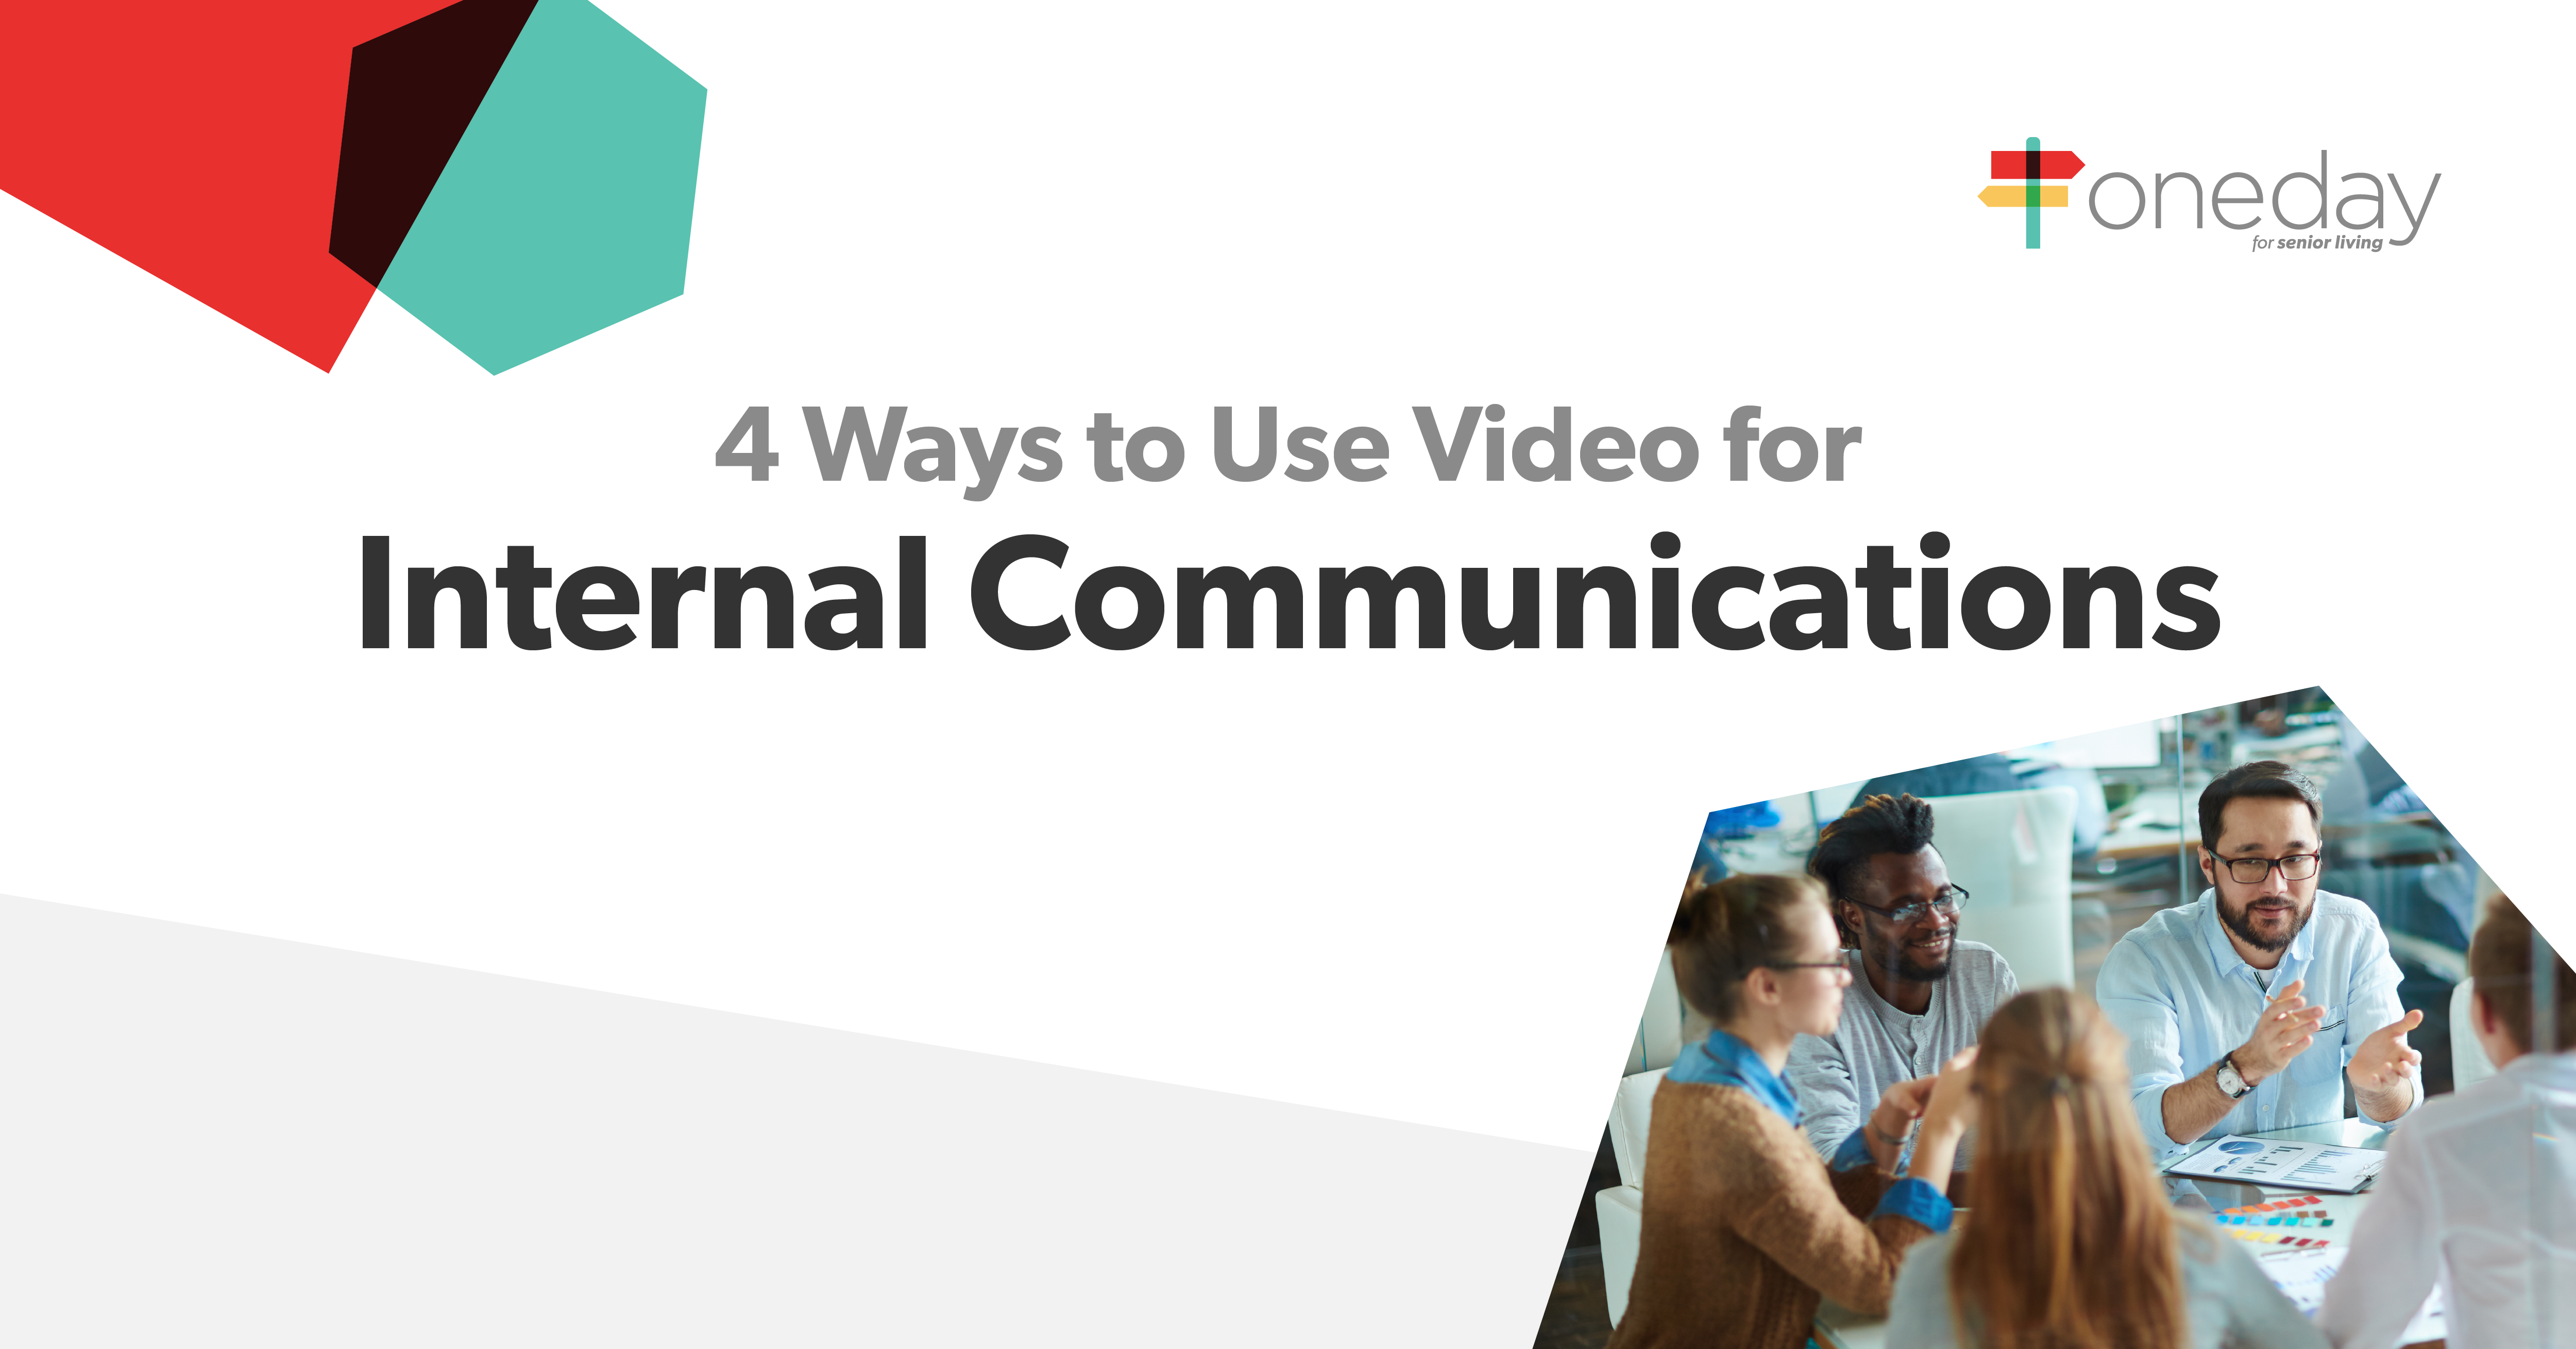 Simple insights and tips on using video to maximize the efficiency and effectiveness of internal communication across your senior living community.